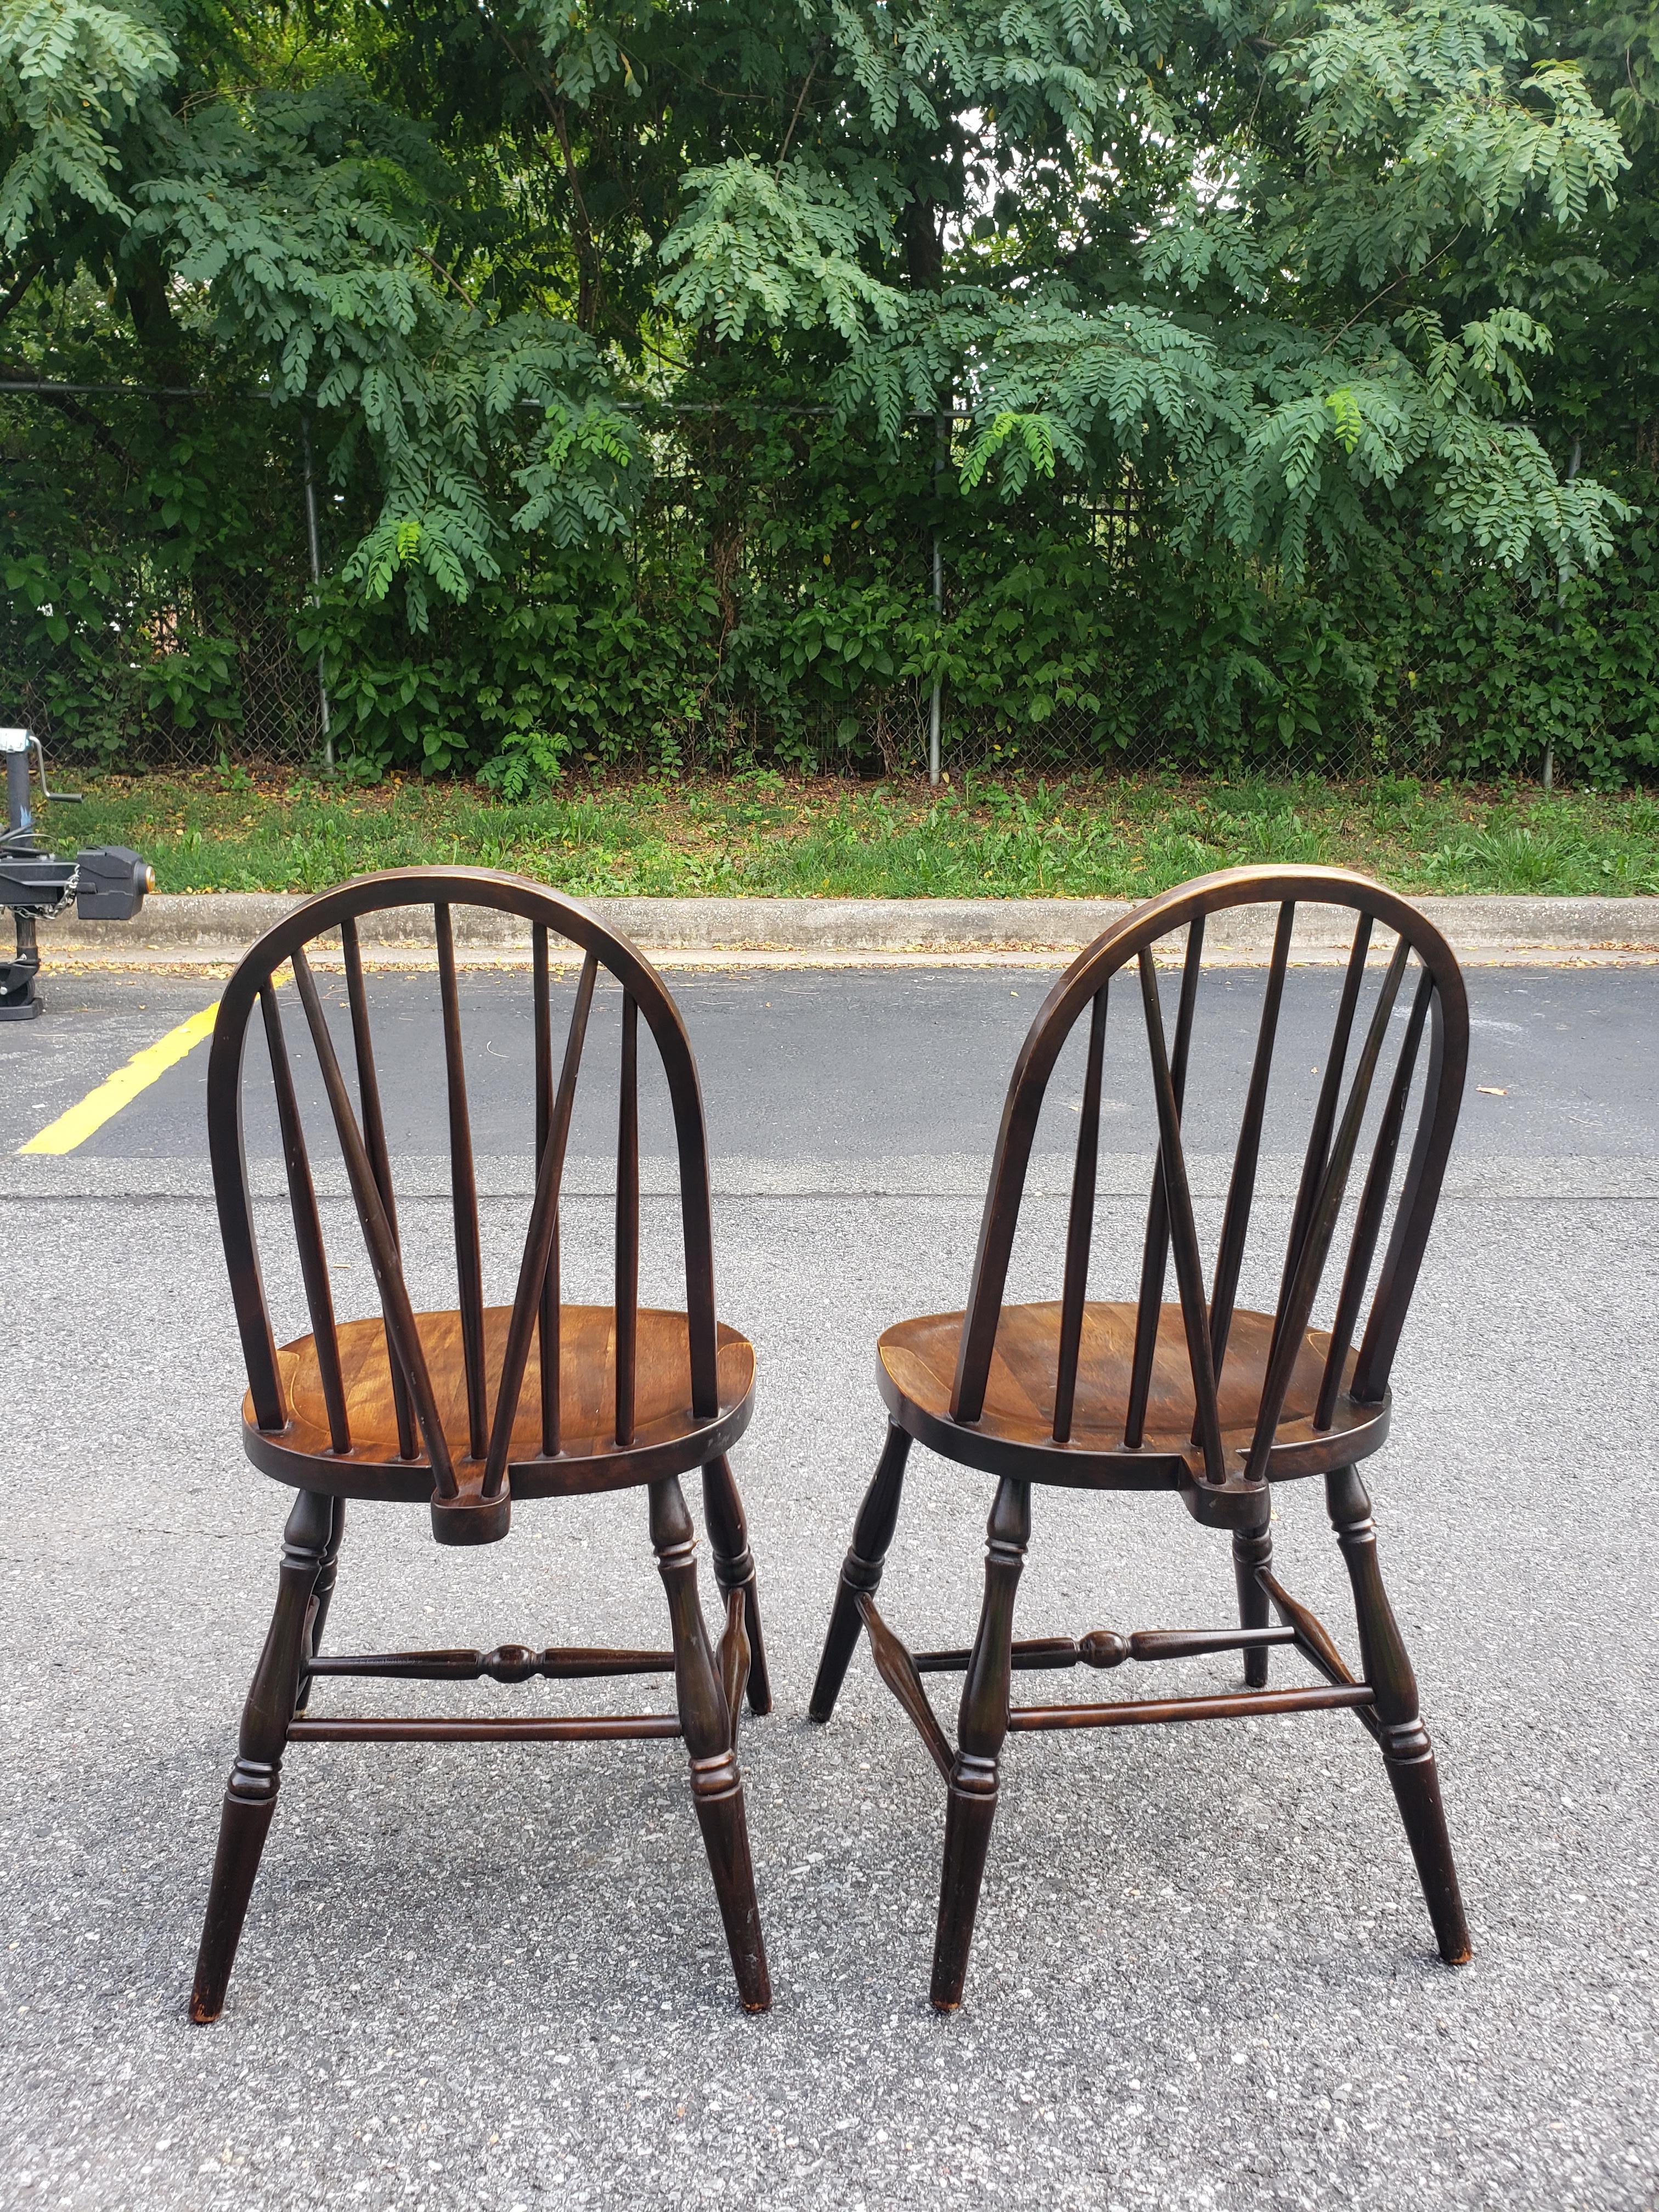 American 1900s Parkersburg Chair Walnut Brace Back Windsor Side Chairs, Pair